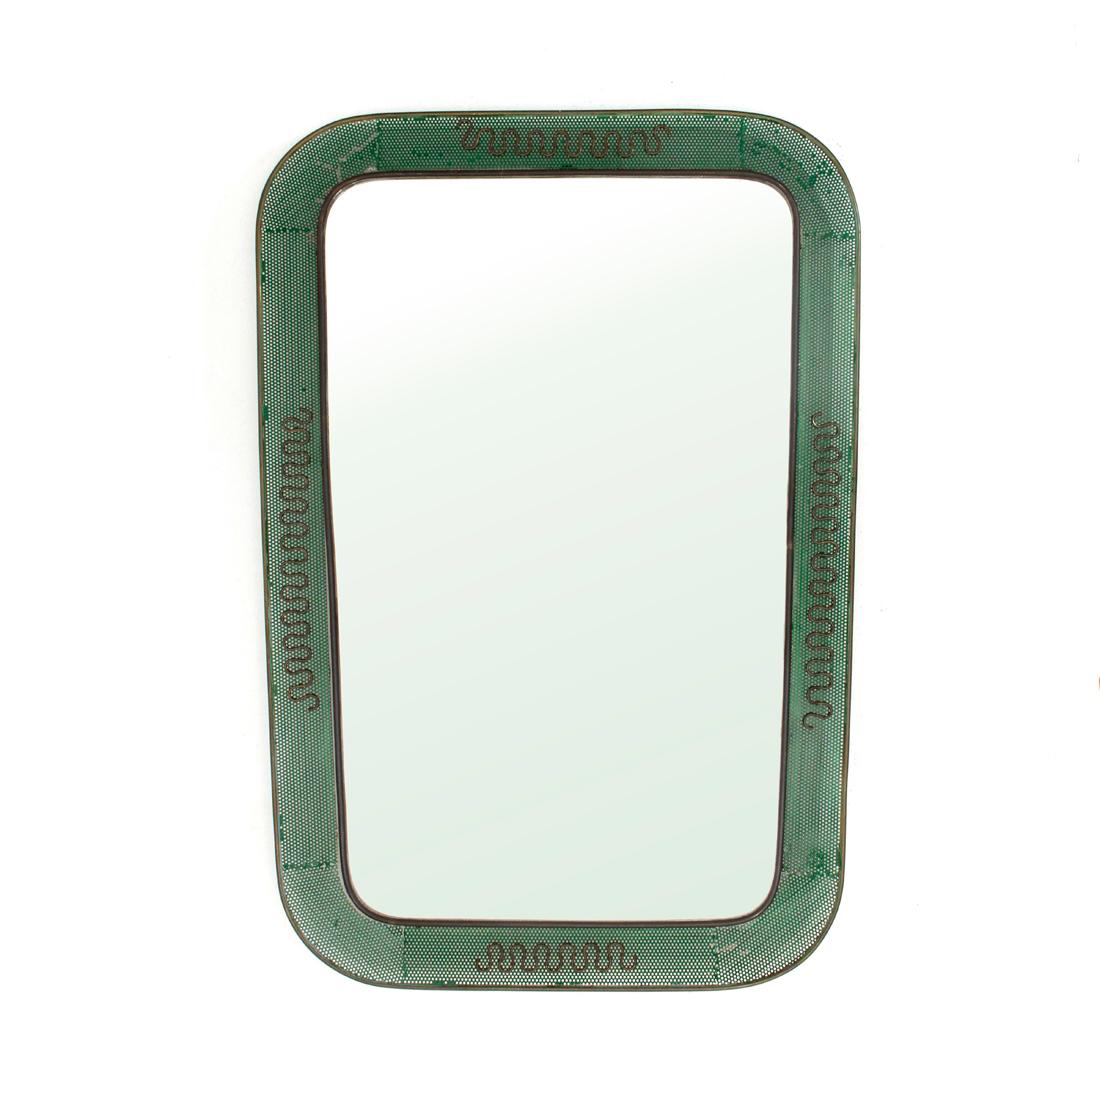 Mid-20th Century Italian Perforated Metal and Brass Frame Mirror, 1950s